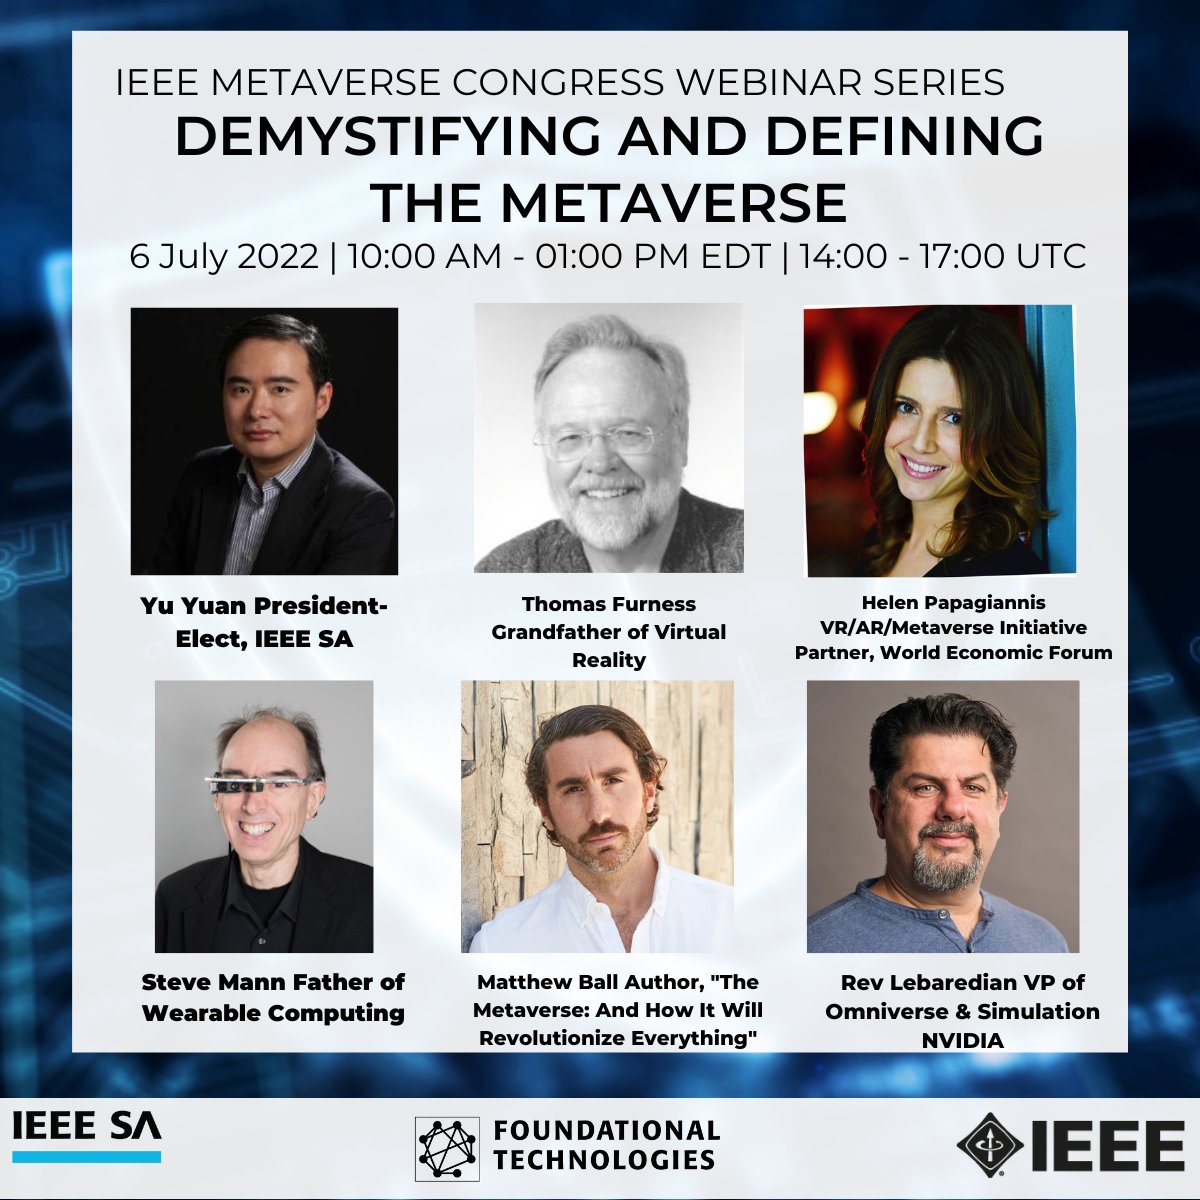 IEEE Metaverse Congress Webinar Series Wednesday, July 6 at 10:00 Eastern For more information and to Register for this free webinar, go to. engagestandards.ieee.org/IEEE-Metaverse… #IEEE #IEEESA #Metaverse #AR #VR #DigitalTransformation #Sustainability